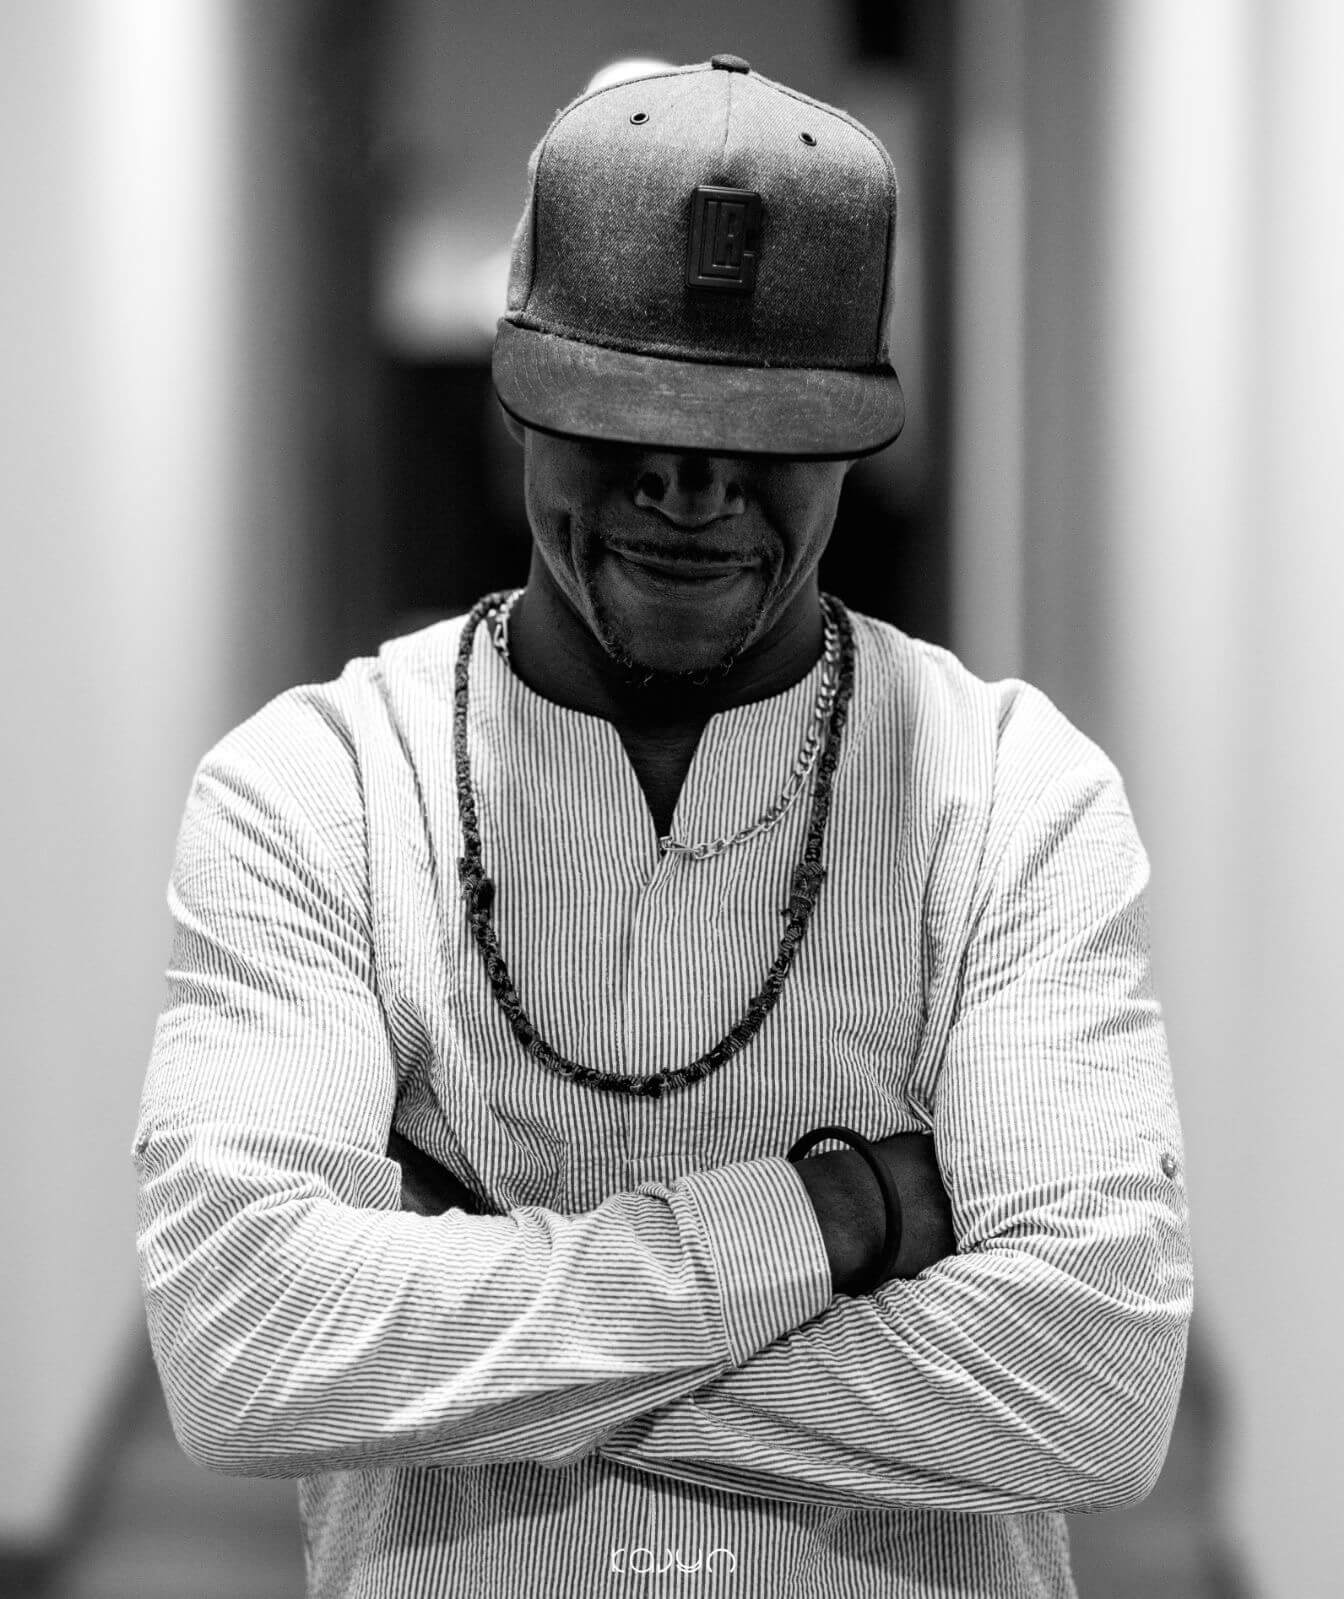 Renowned for his extraordinary Hip Hop style that mixes African dance and funk techniques, He is also a specialist in New Jack Swing dance style, that he has developped.